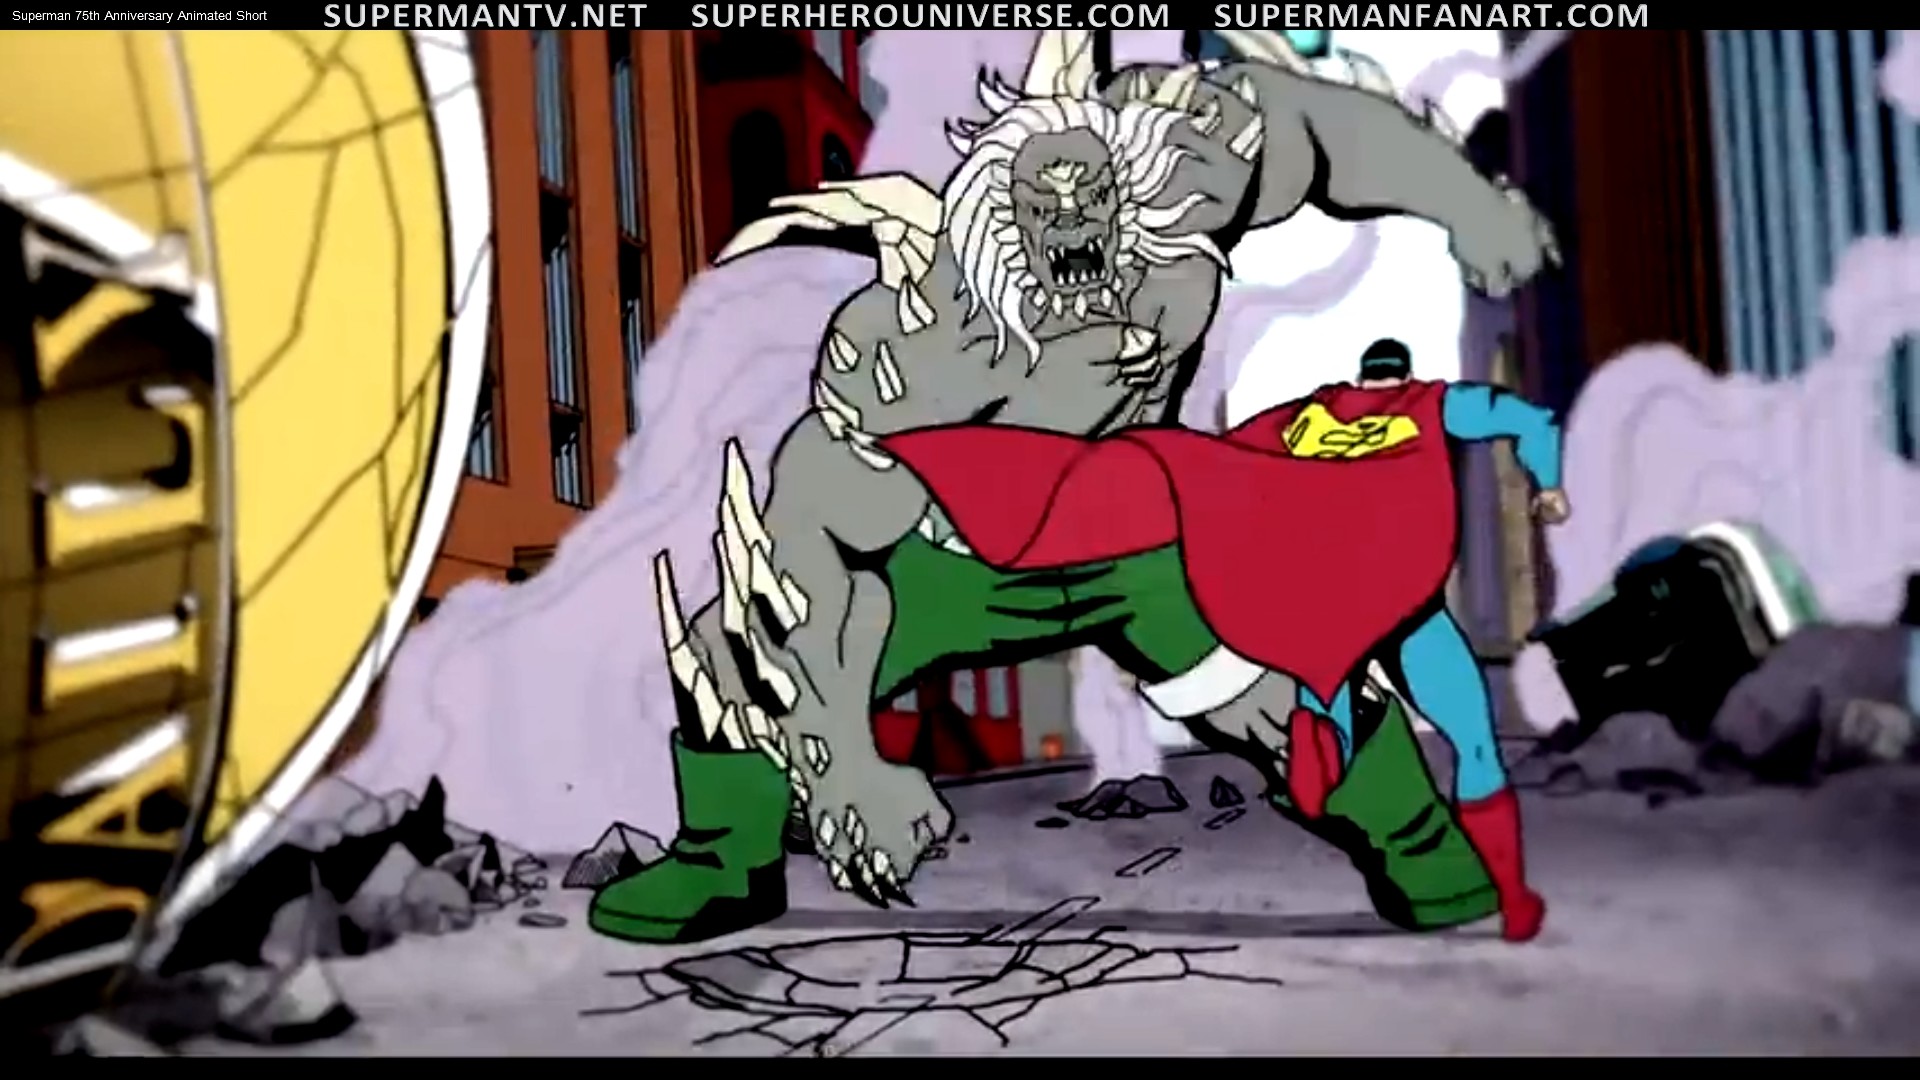 1920x1080 Screen shot from the Anniversary Animated Short in wallpaper size featuring  Superman fighting Doomsday - The short was done in honor of Man of Steel to  ...